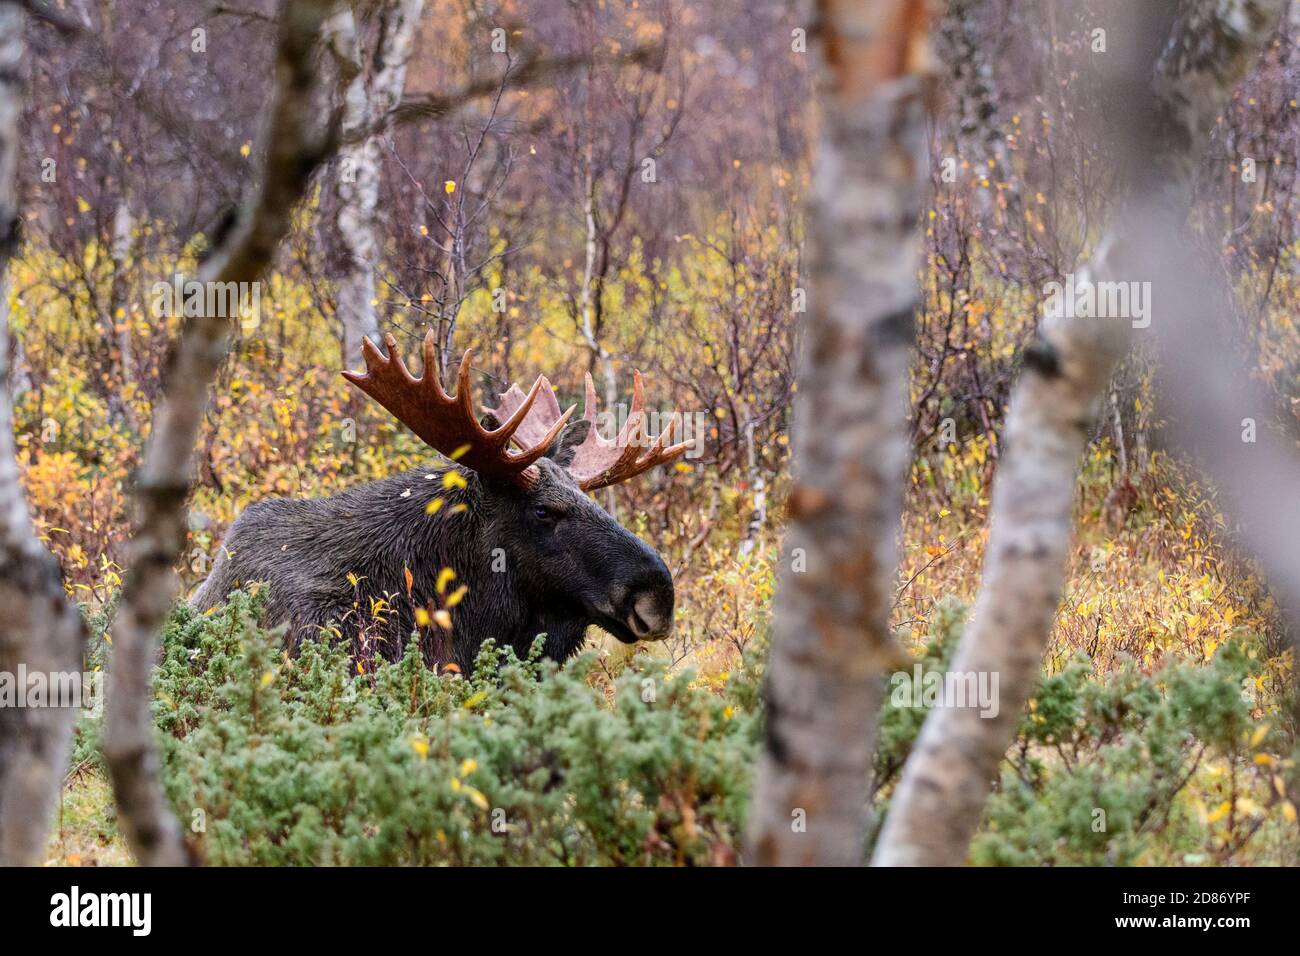 Big bull moose with large antlers in Sarek National Park, Sweden Stock Photo